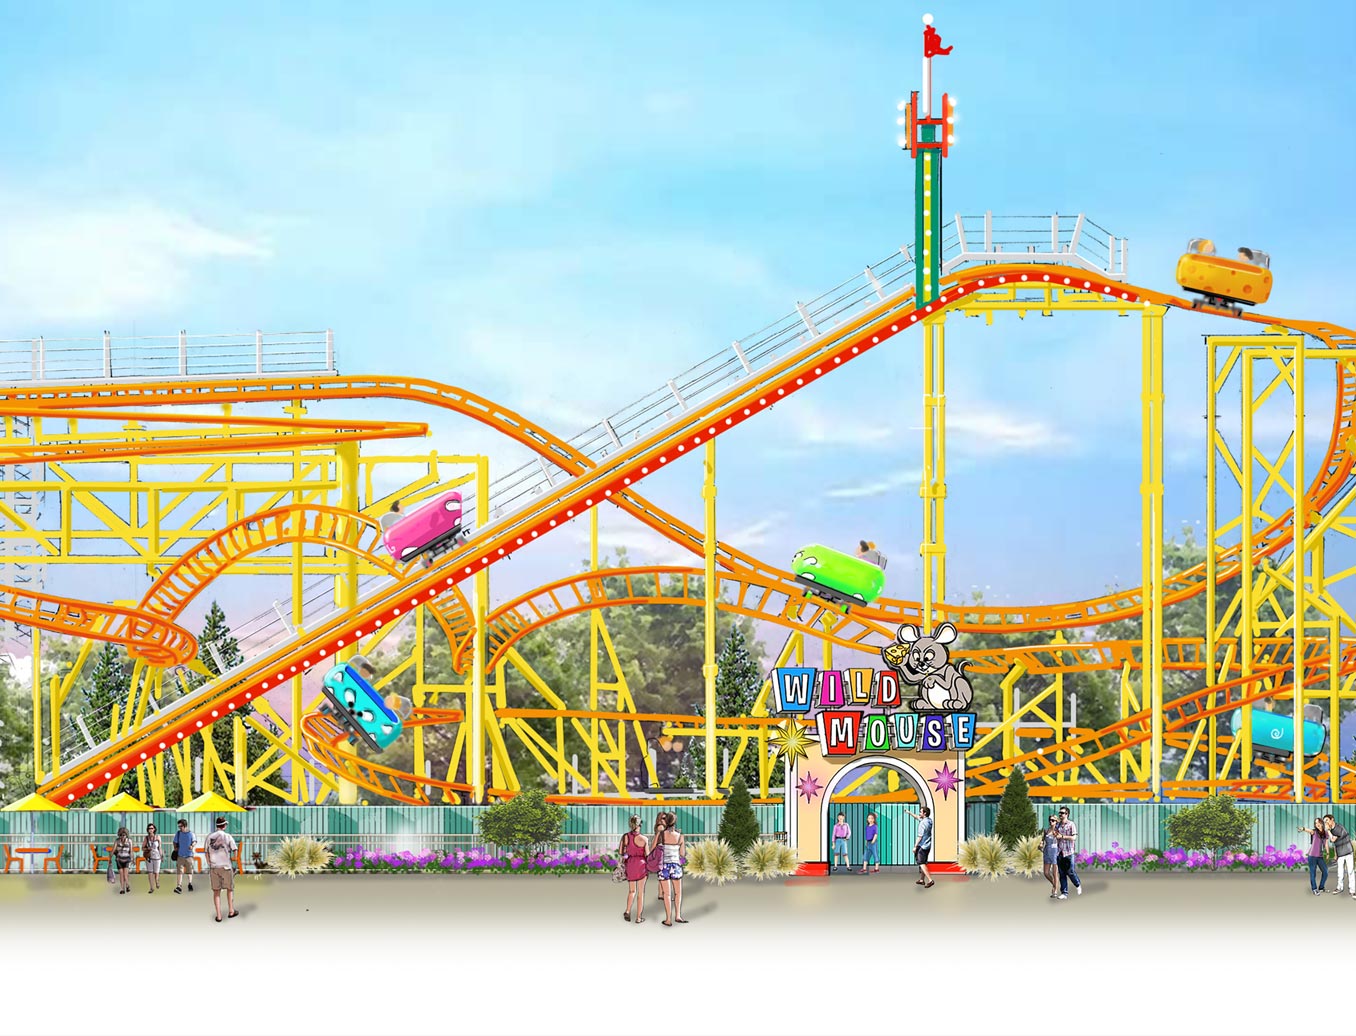 Concept art of Wild Mouse Roller Coaster